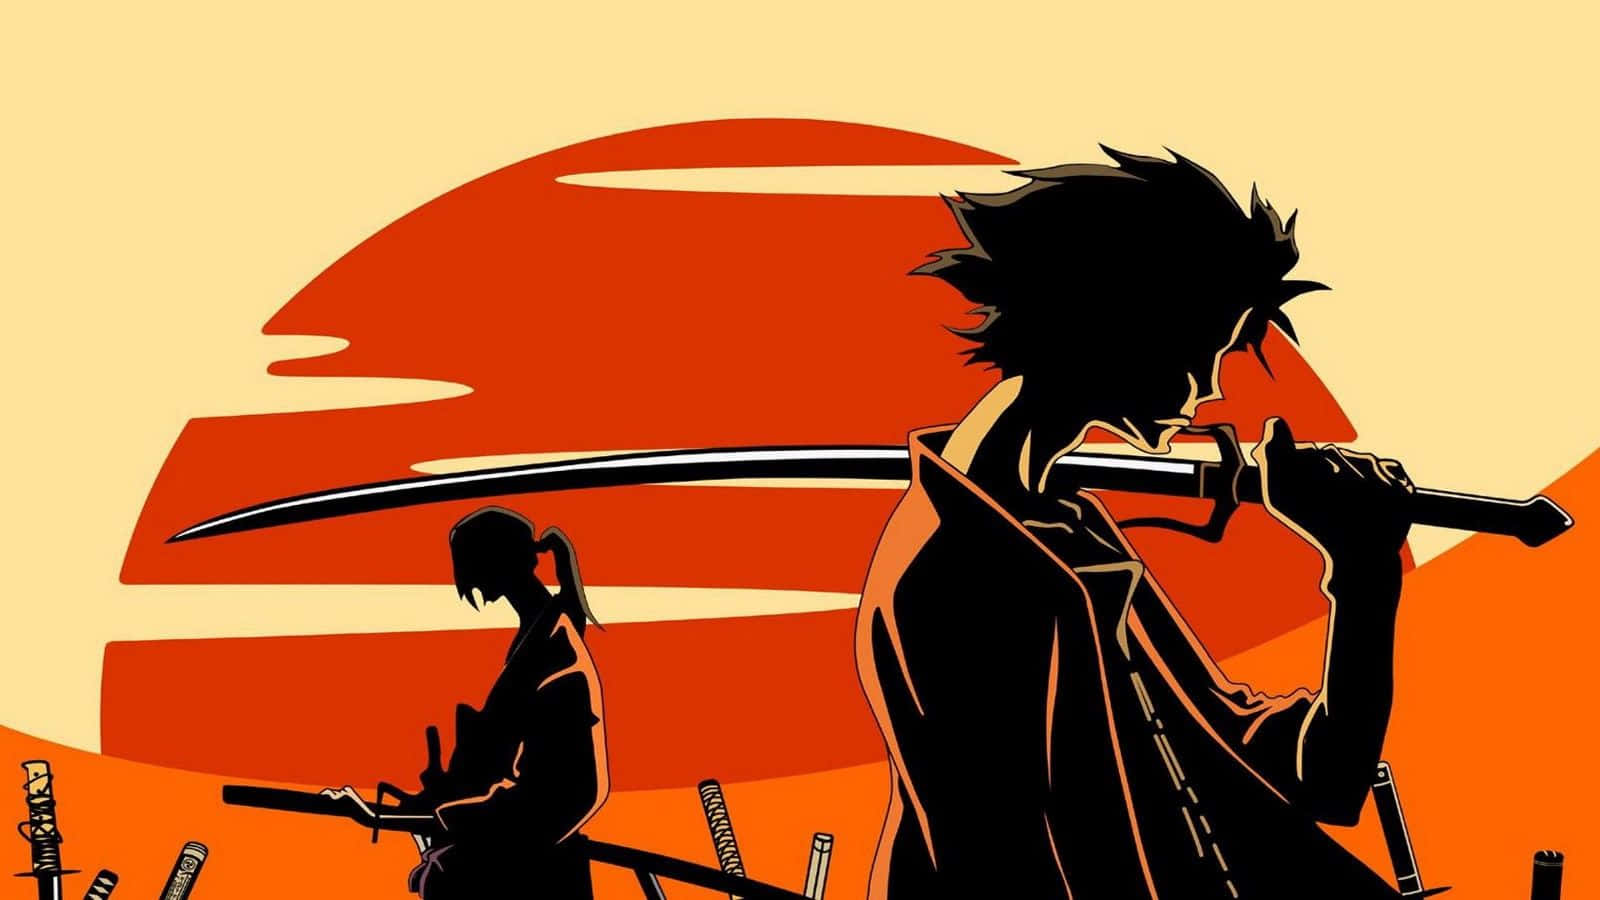 A Silhouette Of Two People Holding Swords In The Sun Background